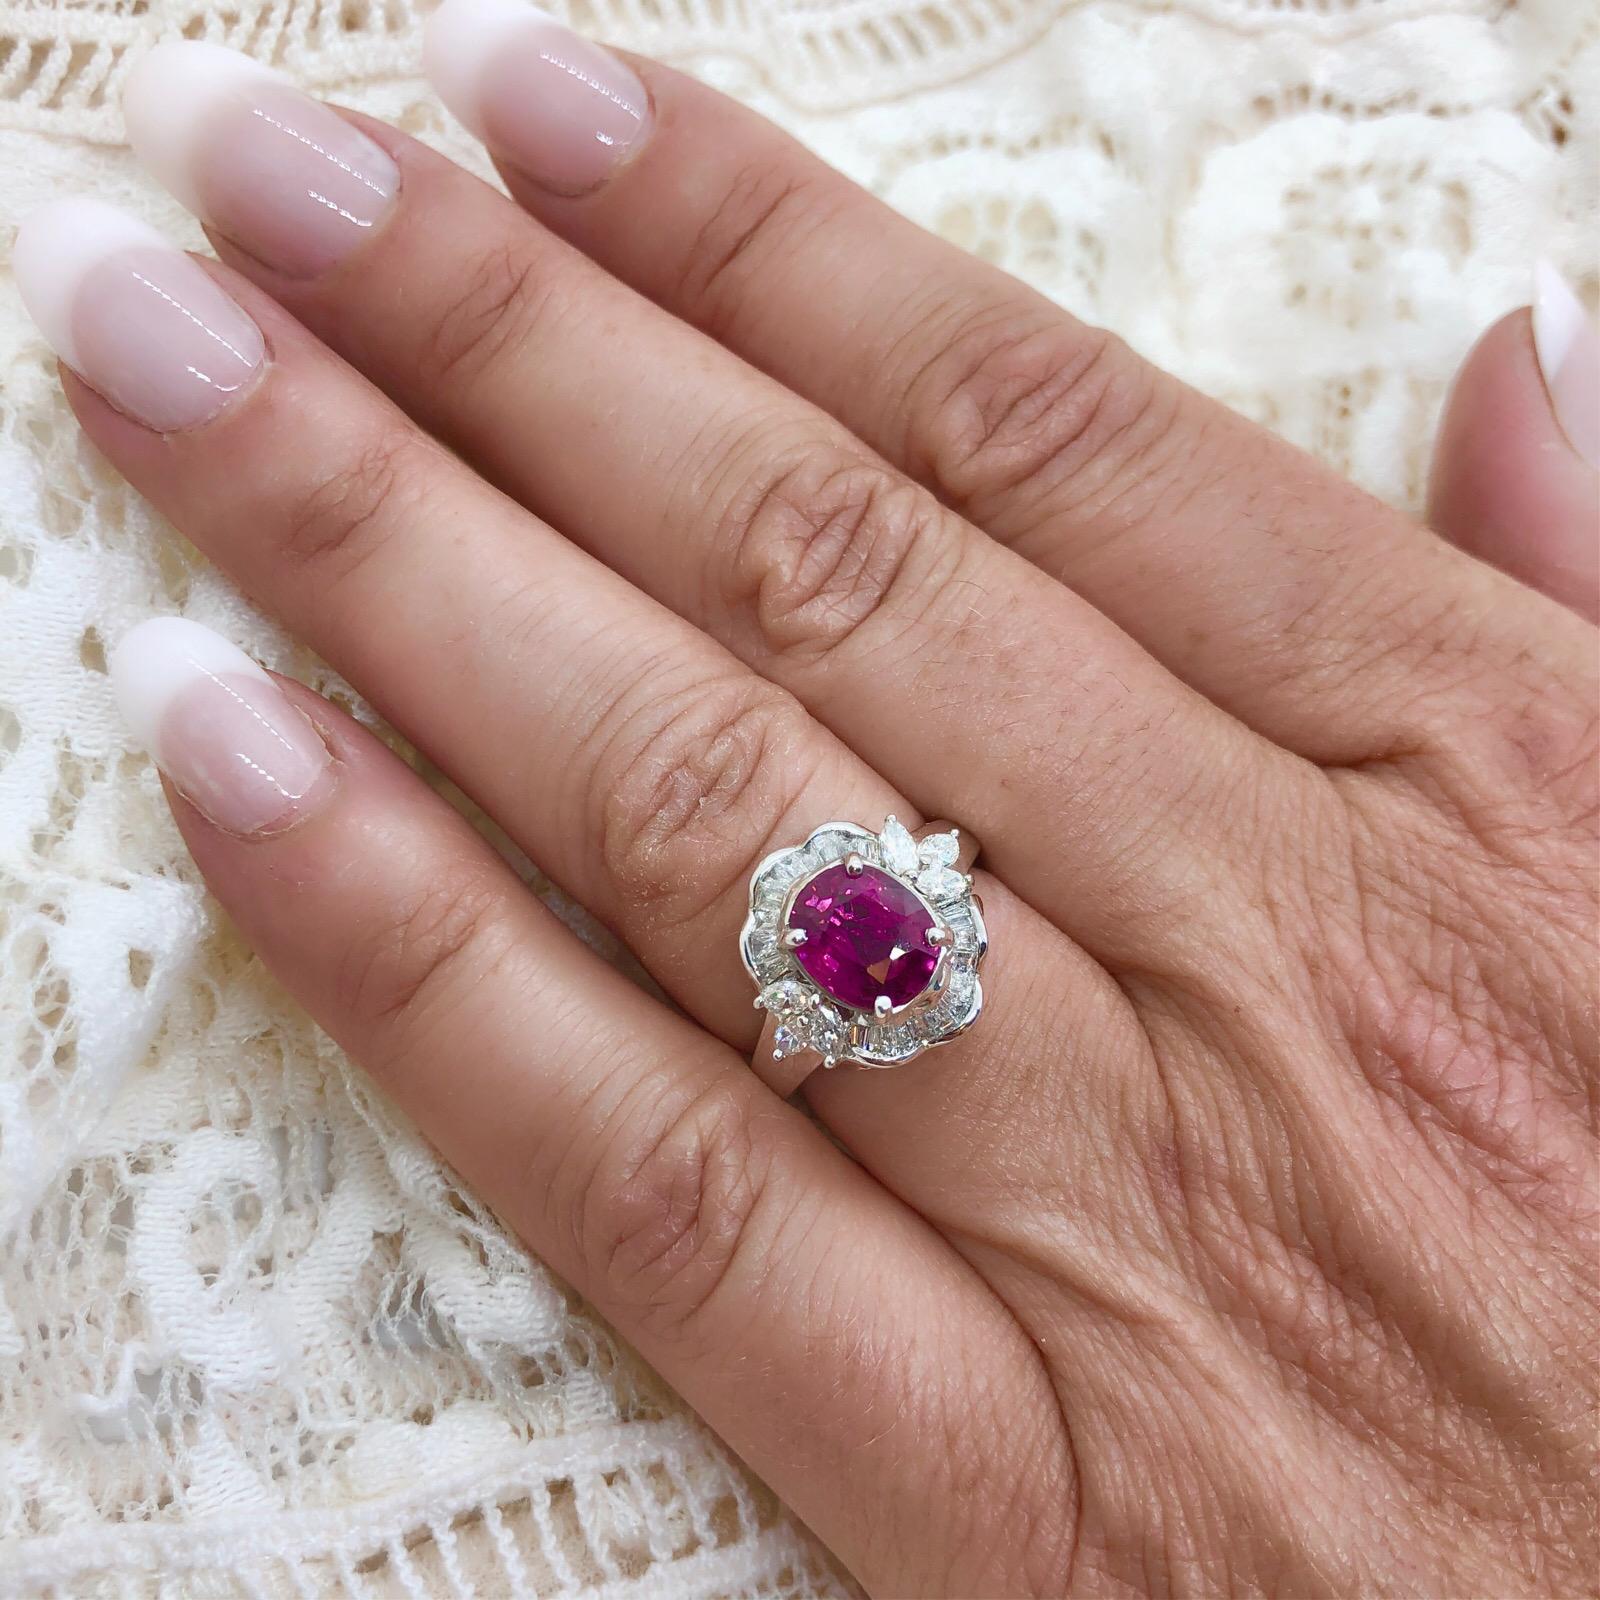 18Kt White Gold Ring features 1 Cushion Cut Purplish Red Ruby for 2.71cts with 28 Marquise and Tapered Baguette Cut Diamonds for approximately 0.75cts Set Halo Style around the Ruby. The ring is a size 7, and weighs 8.1 grams. GIA Certificate